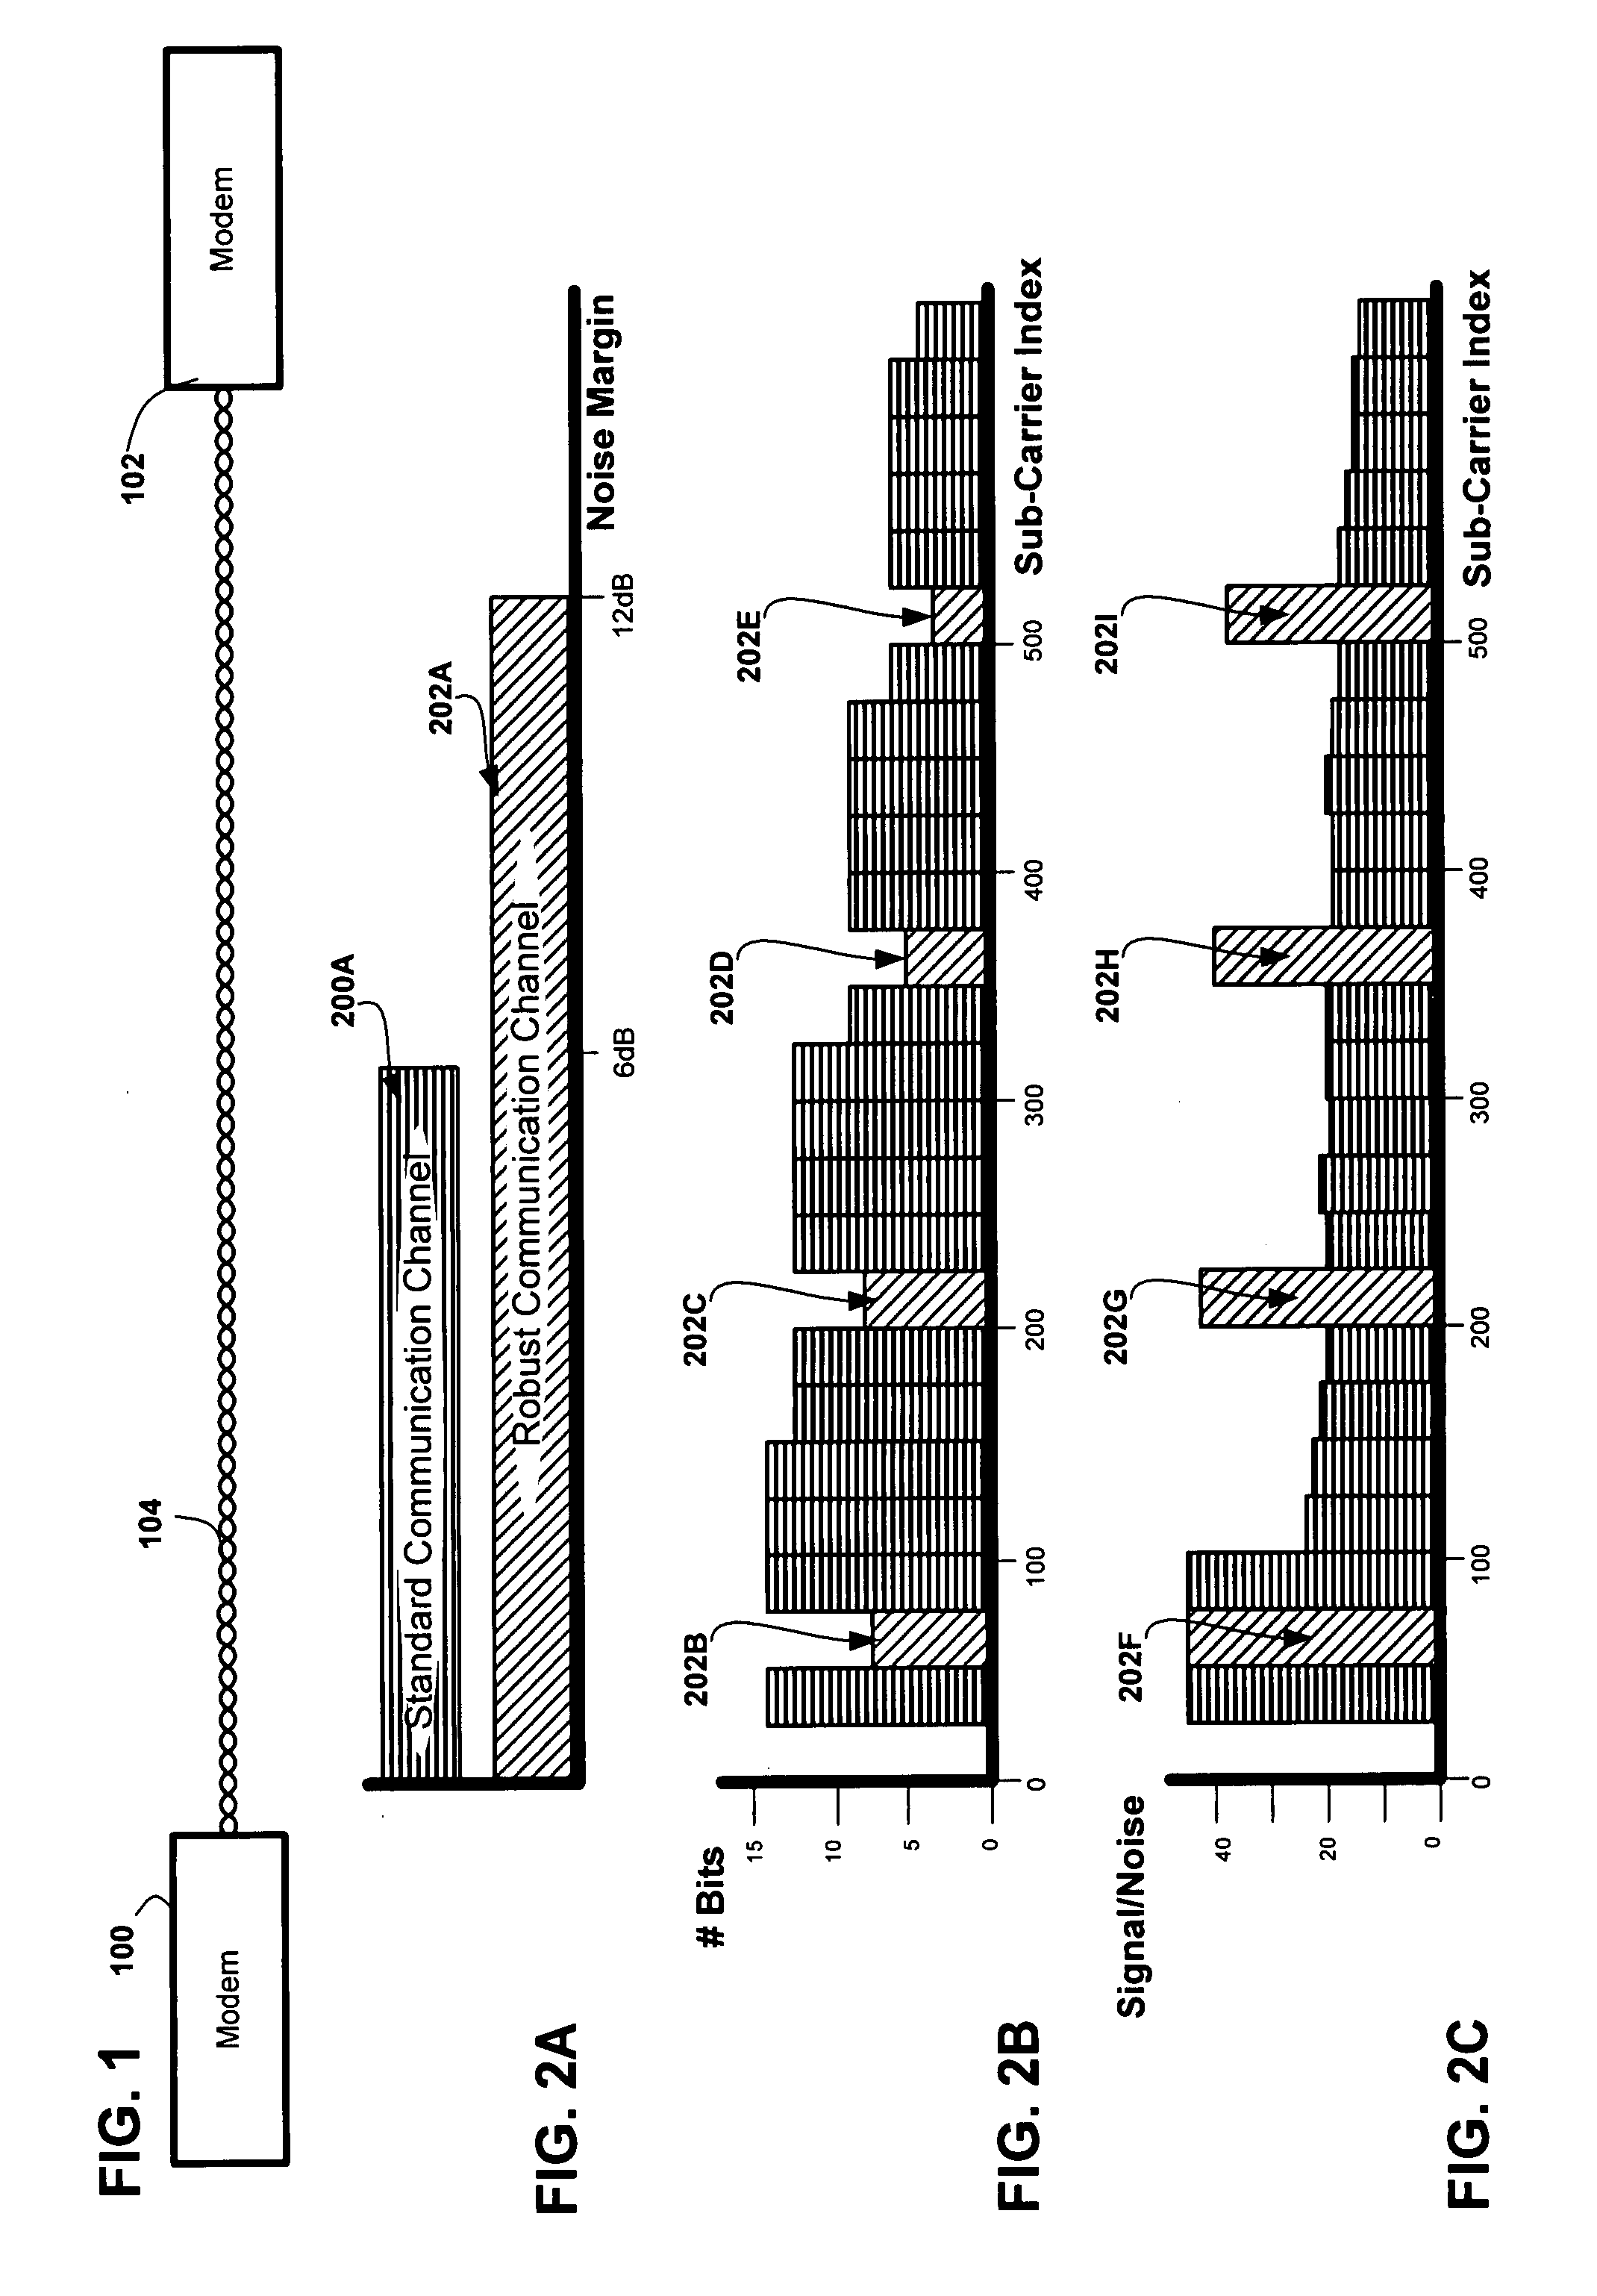 Method and apparatus for differentiated communication channel robustness in a multi-tone transceiver